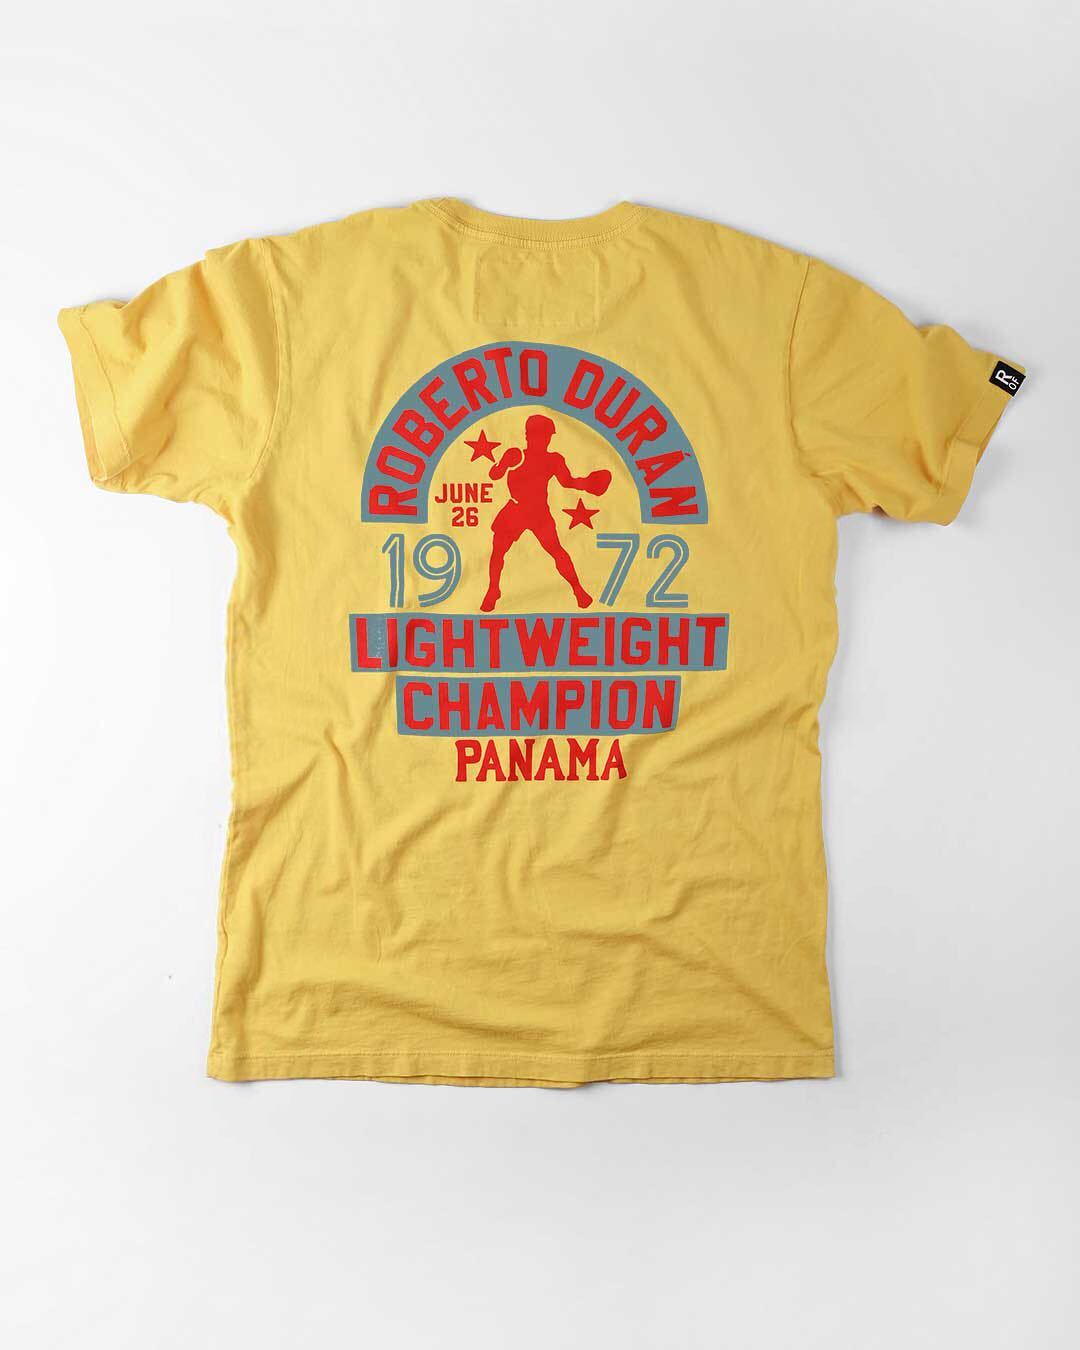 Roberto Duran 1972 Champ Yellow Tee - Roots of Fight Canada